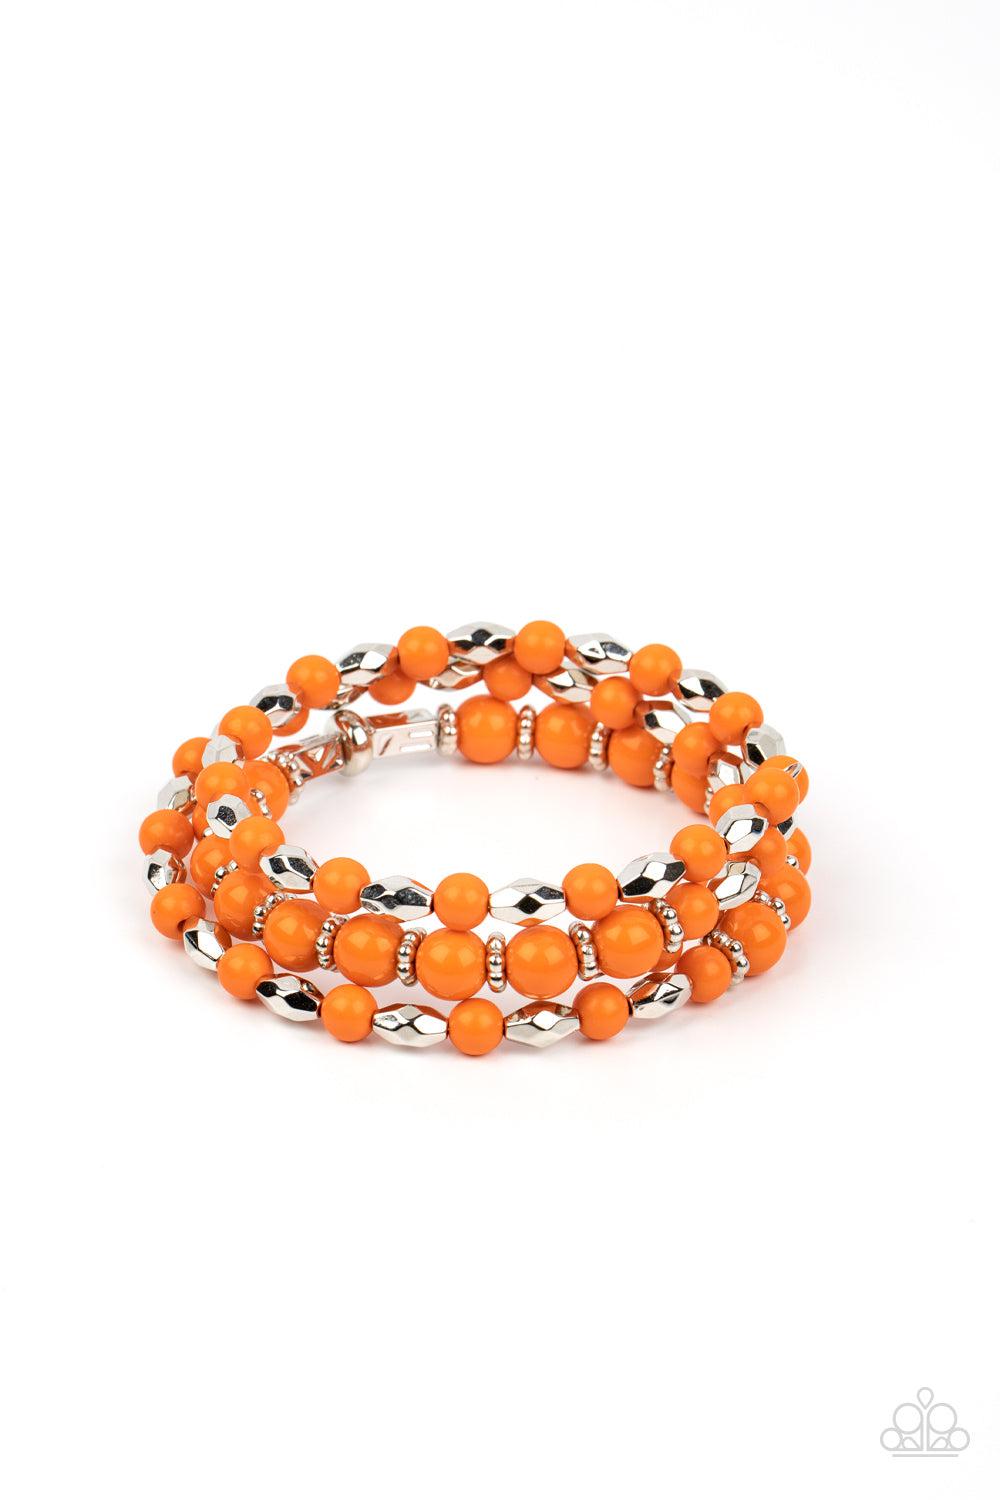 Colorfully Coiled Orange Coil Bracelet - Paparazzi Accessories- lightbox - CarasShop.com - $5 Jewelry by Cara Jewels